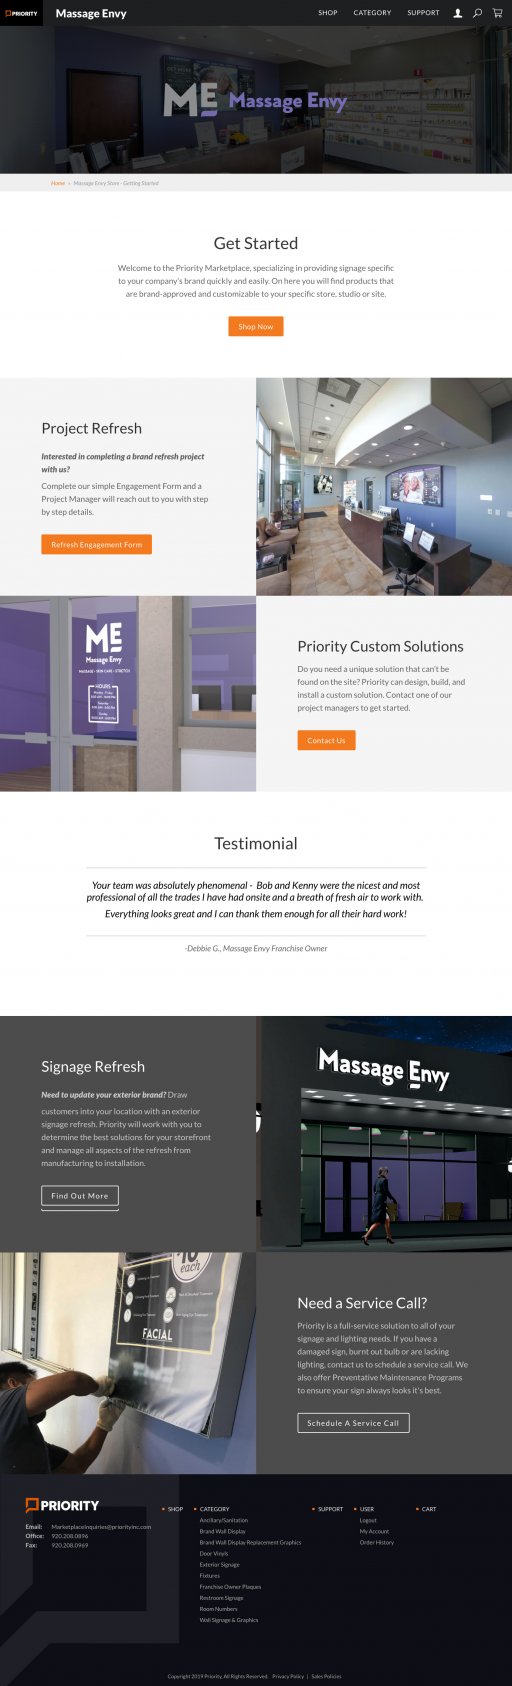 Priority Marketplace - Brand Welcome page